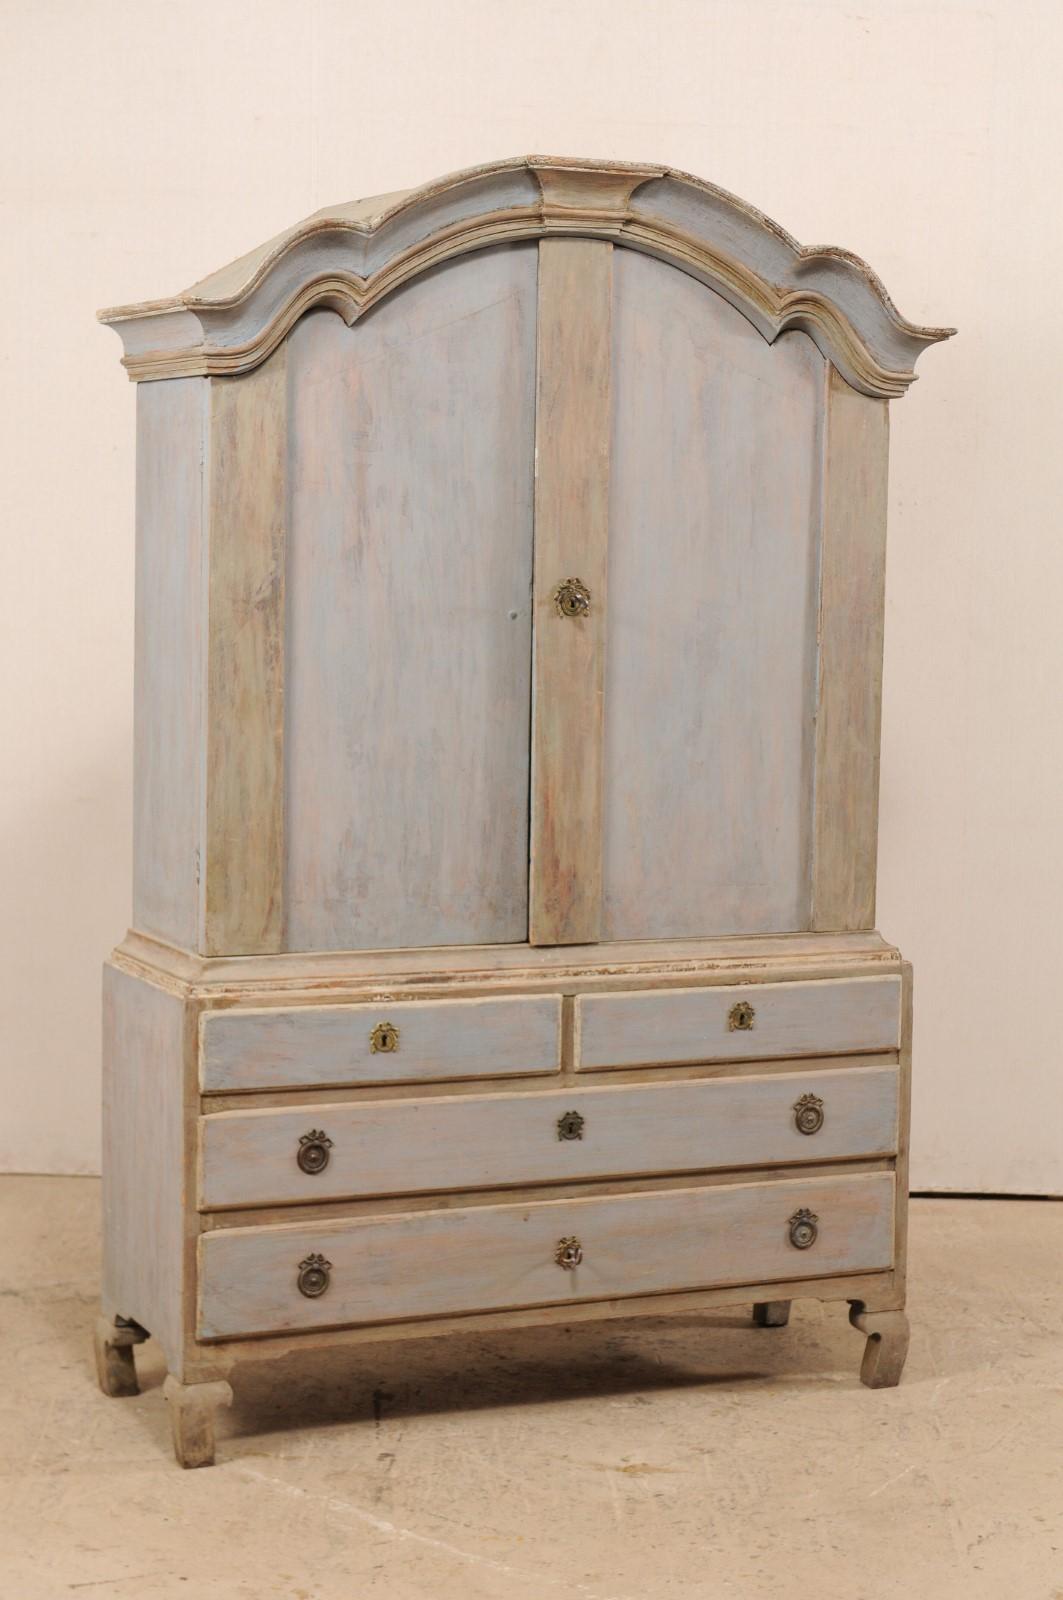 A fabulous 18th century Swedish period Rococo painted wood cabinet with plentiful storage. This antique cabinet from Sweden houses an upper cabinet of two doors, which open on a space divided by two shelves, atop a lower case fitted with a pair of